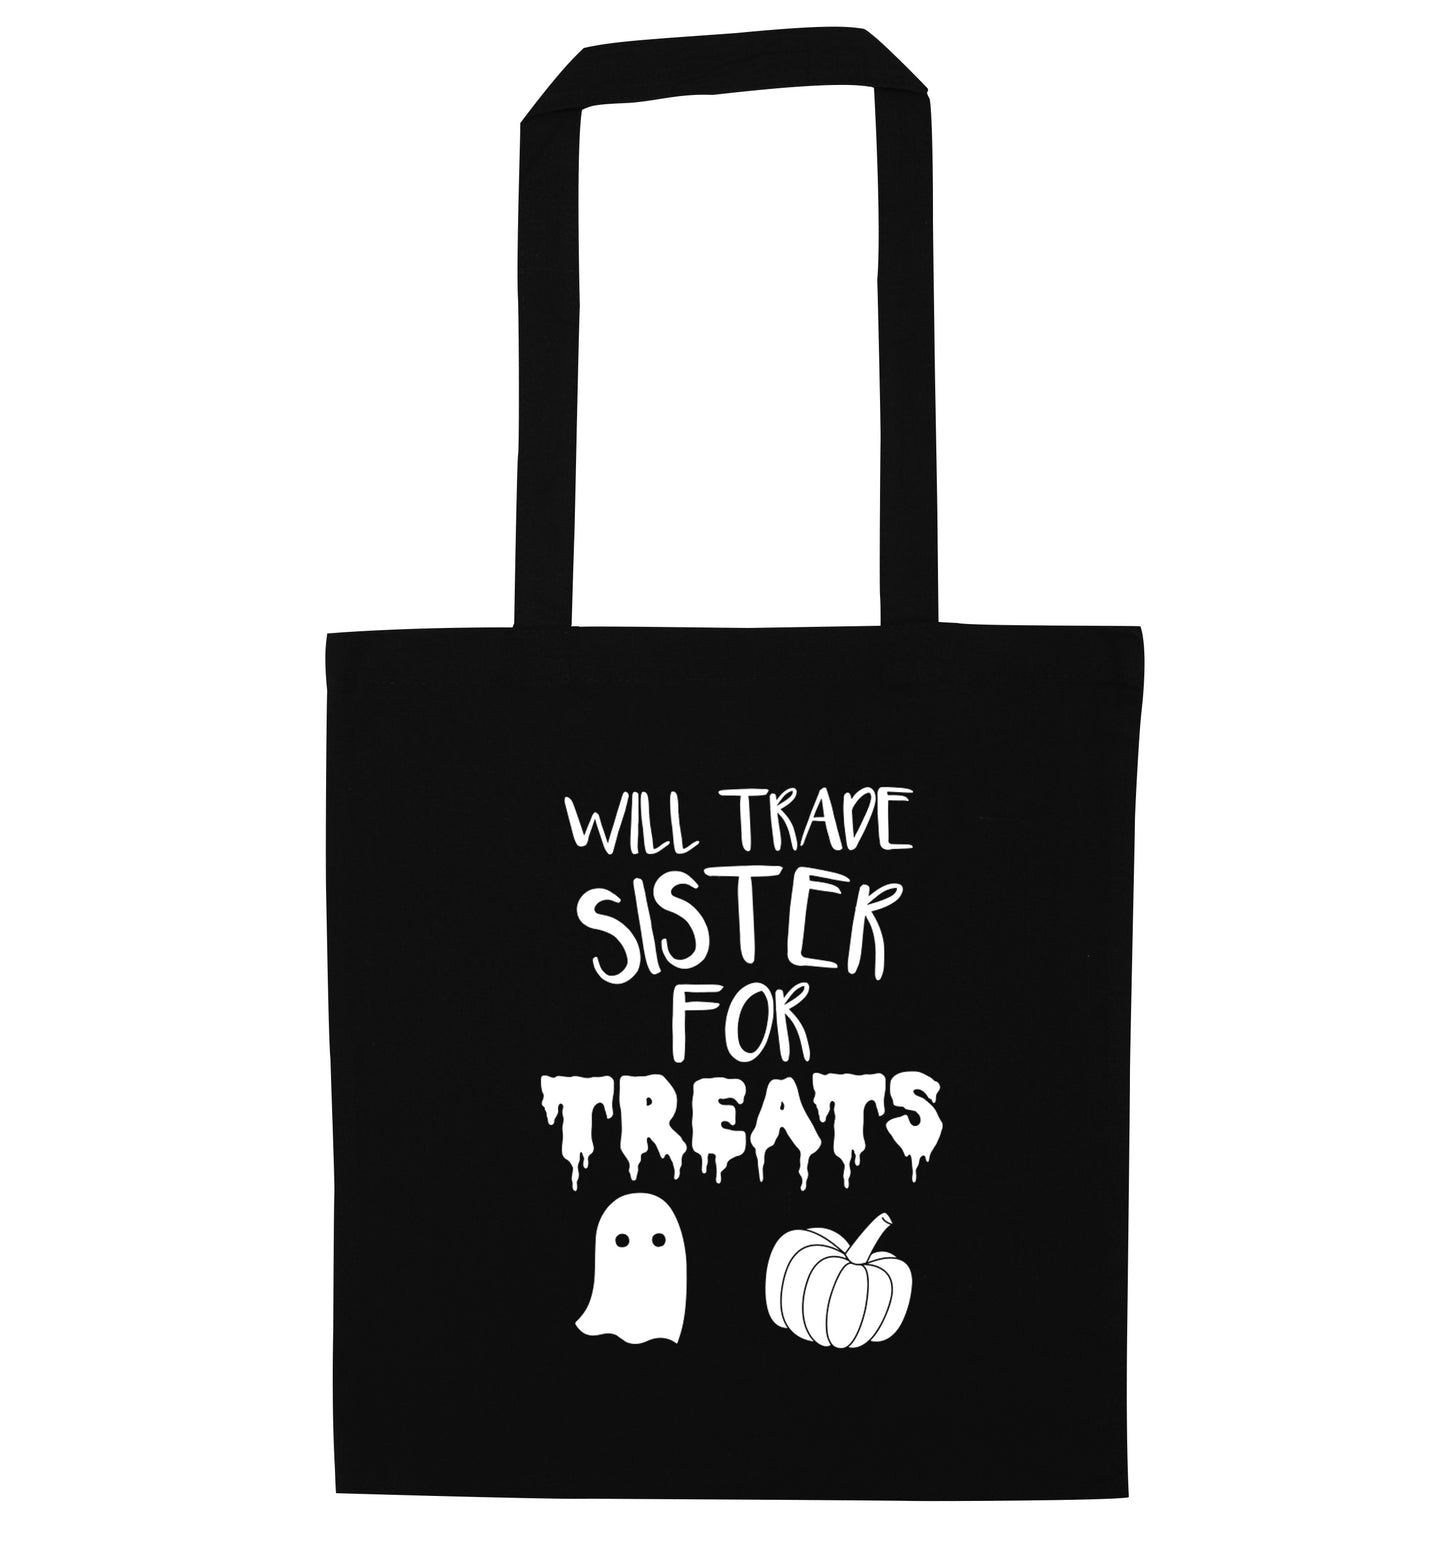 Will trade sister for sweets black tote bag